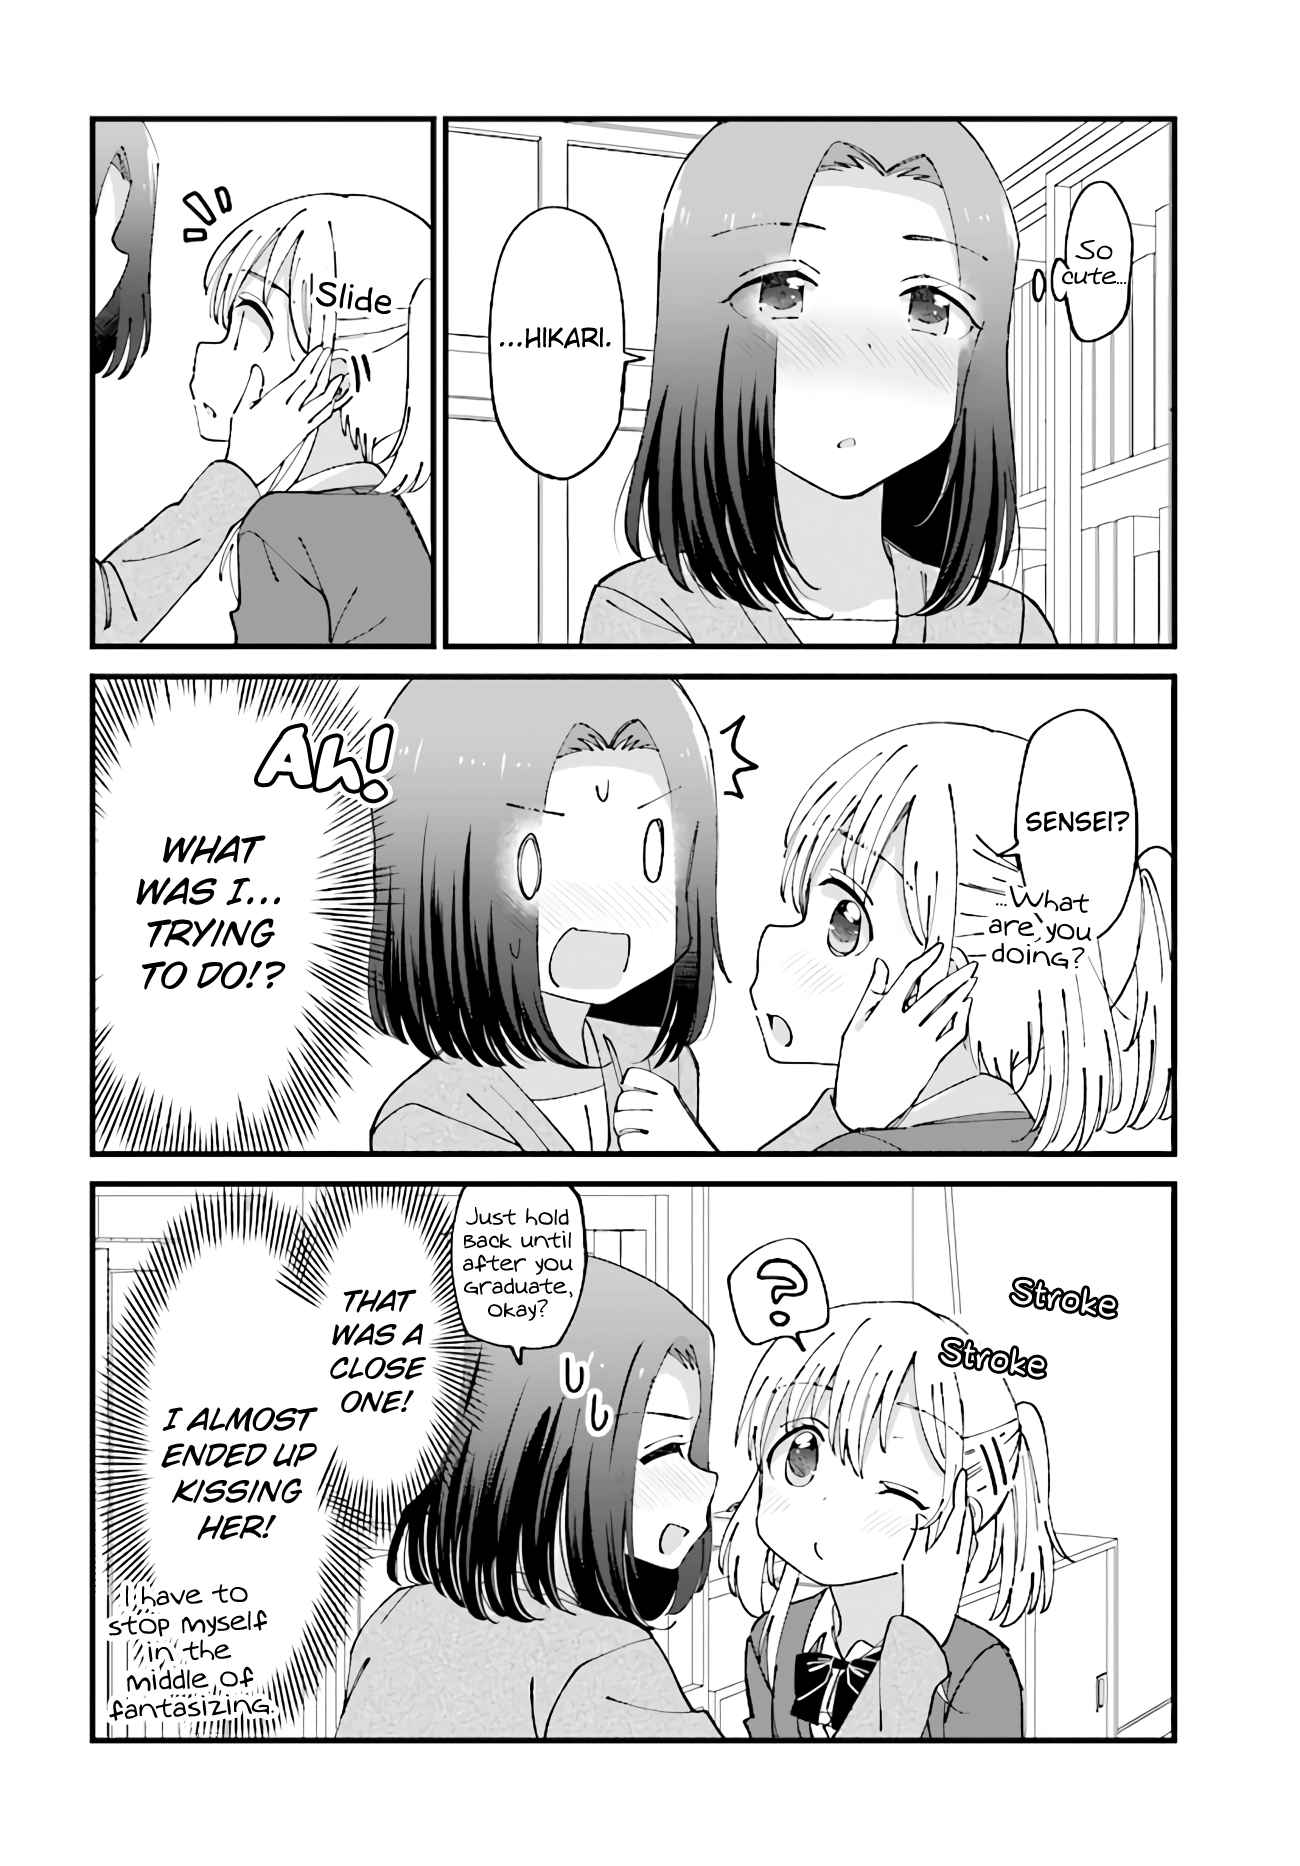 Yuri Moyou Ch. 22 The eldest sister Ryou's love 6